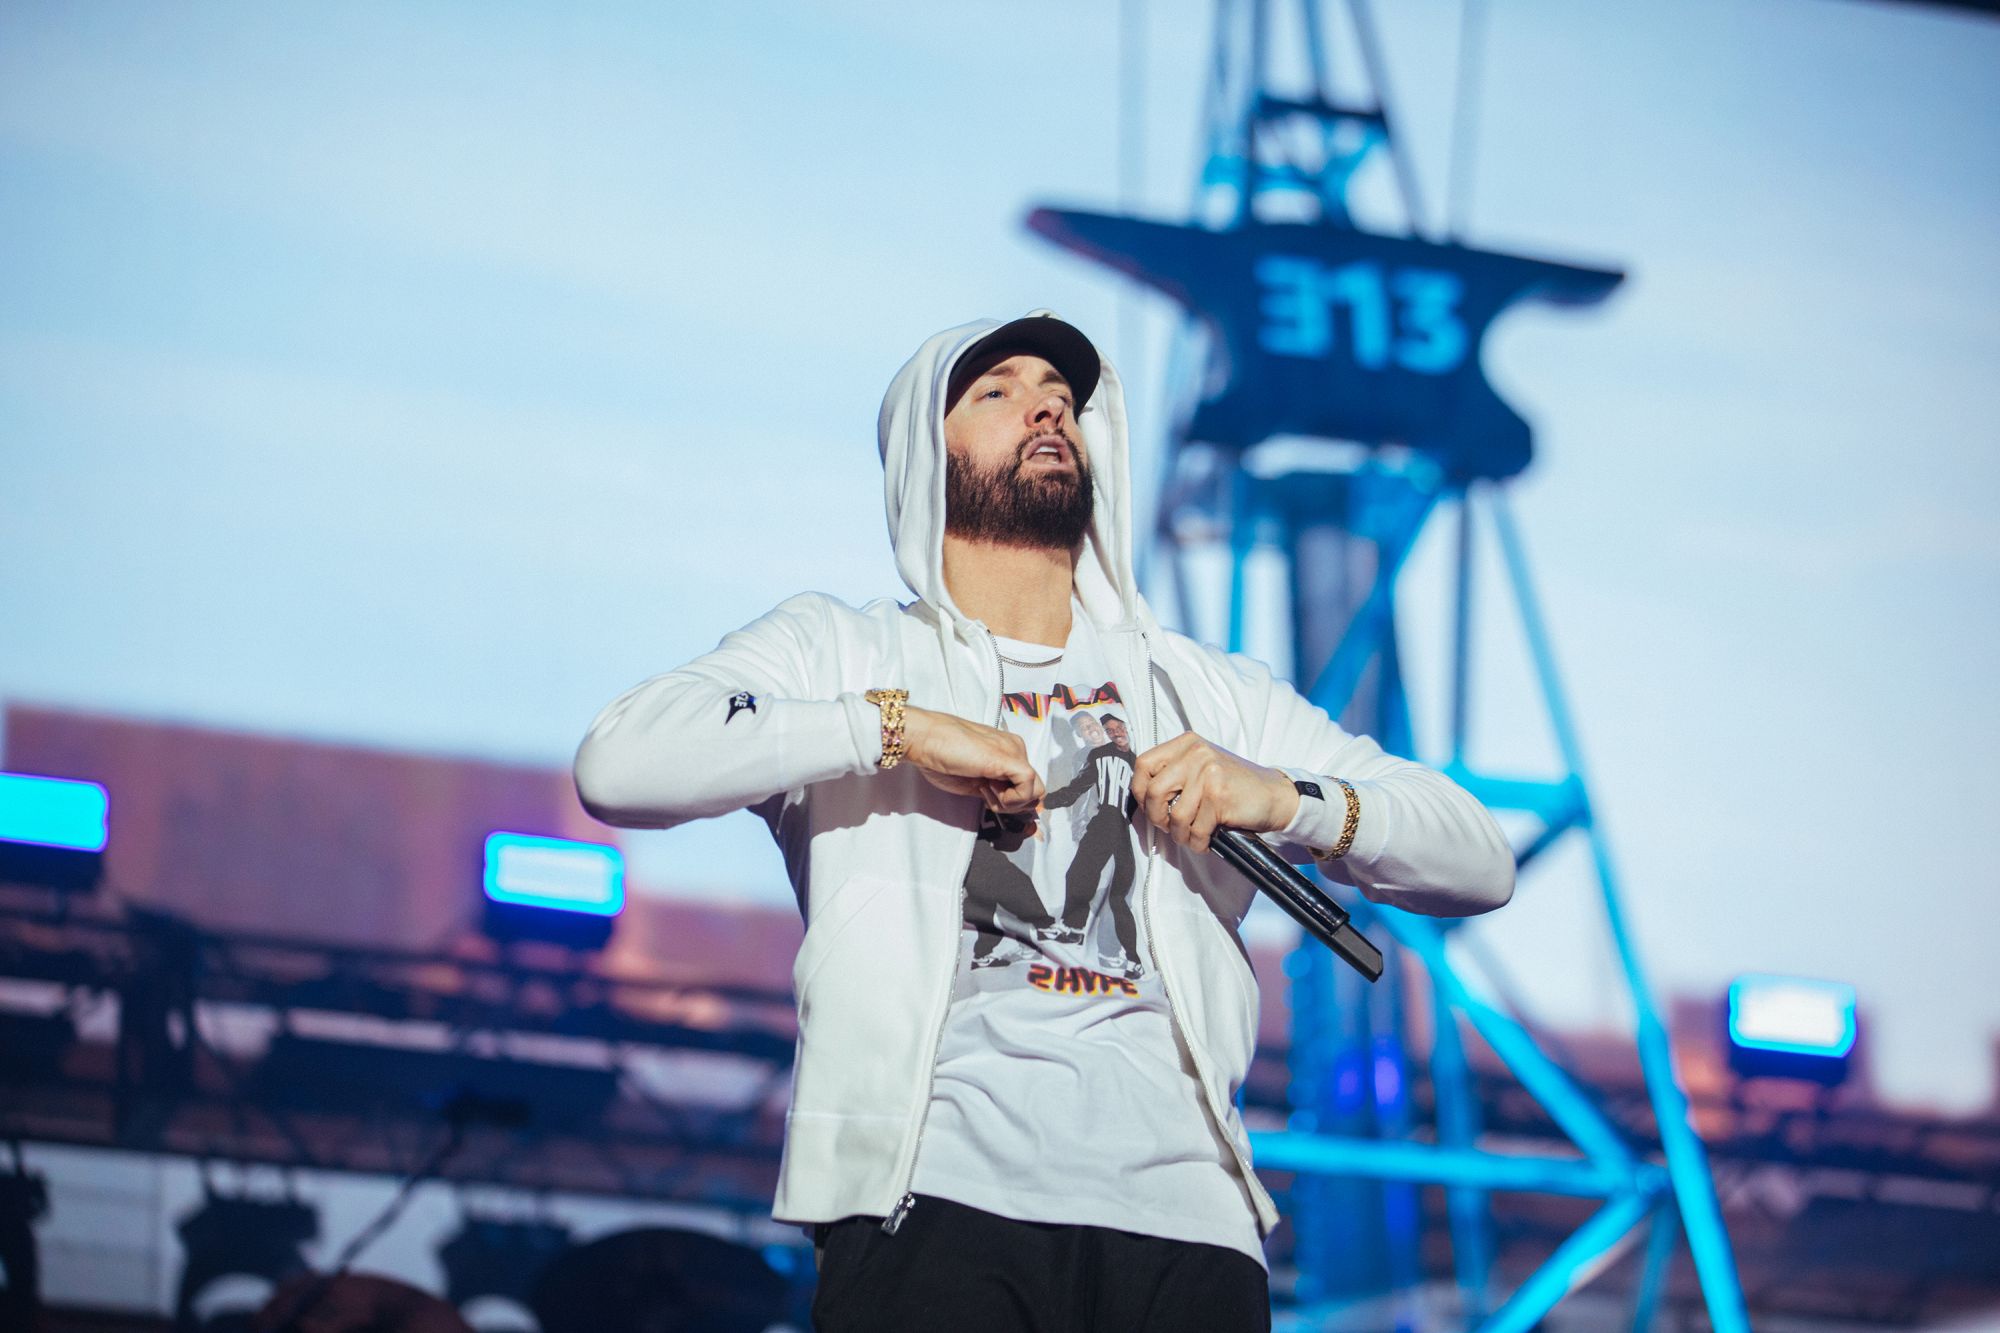 Eminem Surpassed 78 Million Followers on Spotify | Eminem.Pro - the biggest and most trusted source of Eminem